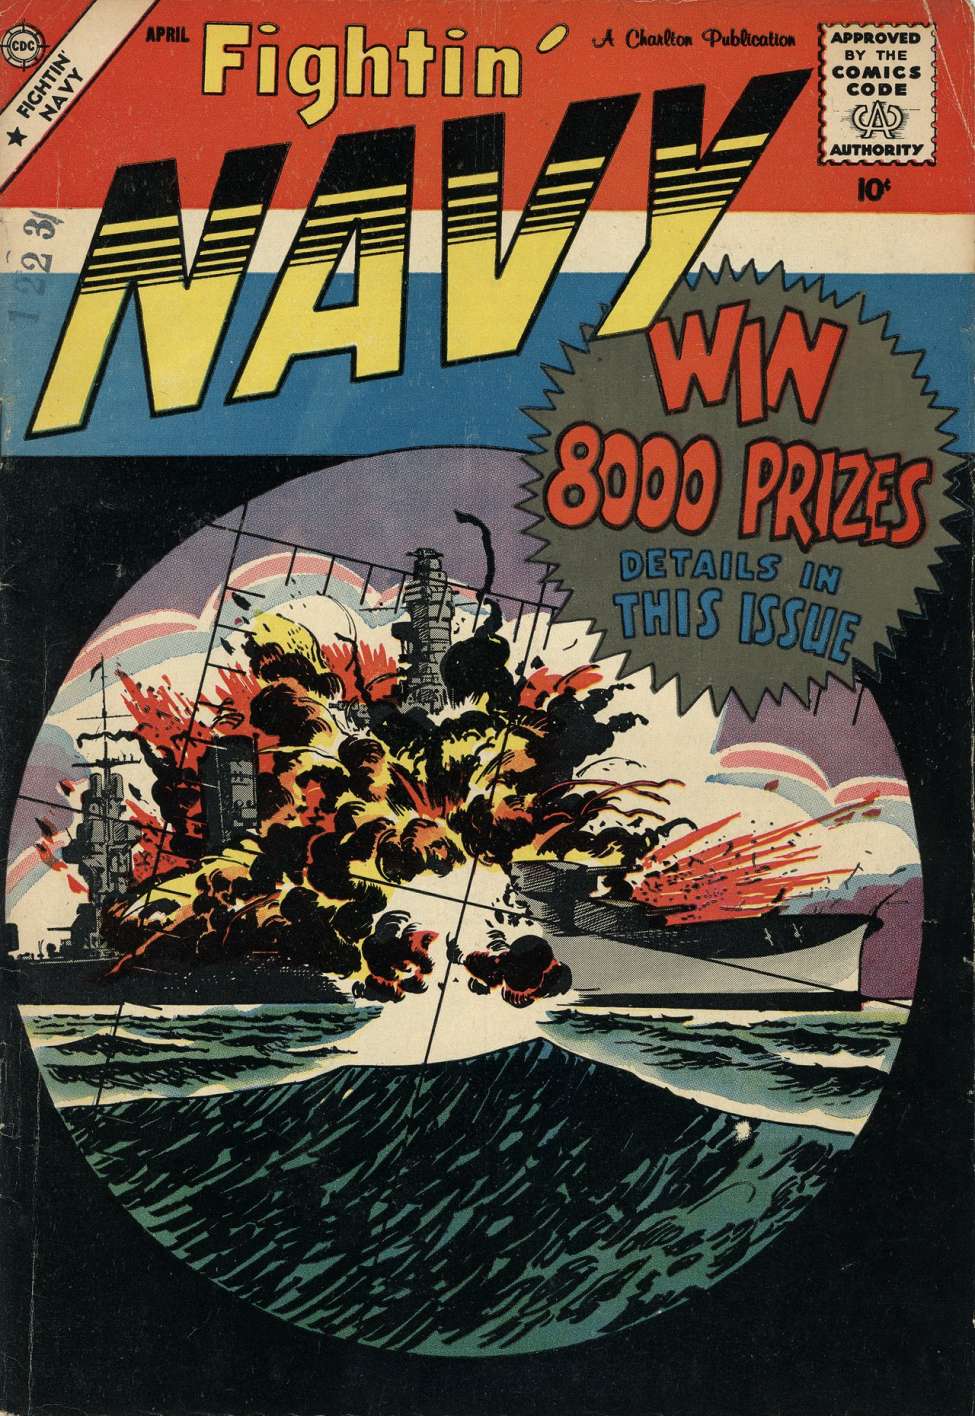 Comic Book Cover For Fightin' Navy 86